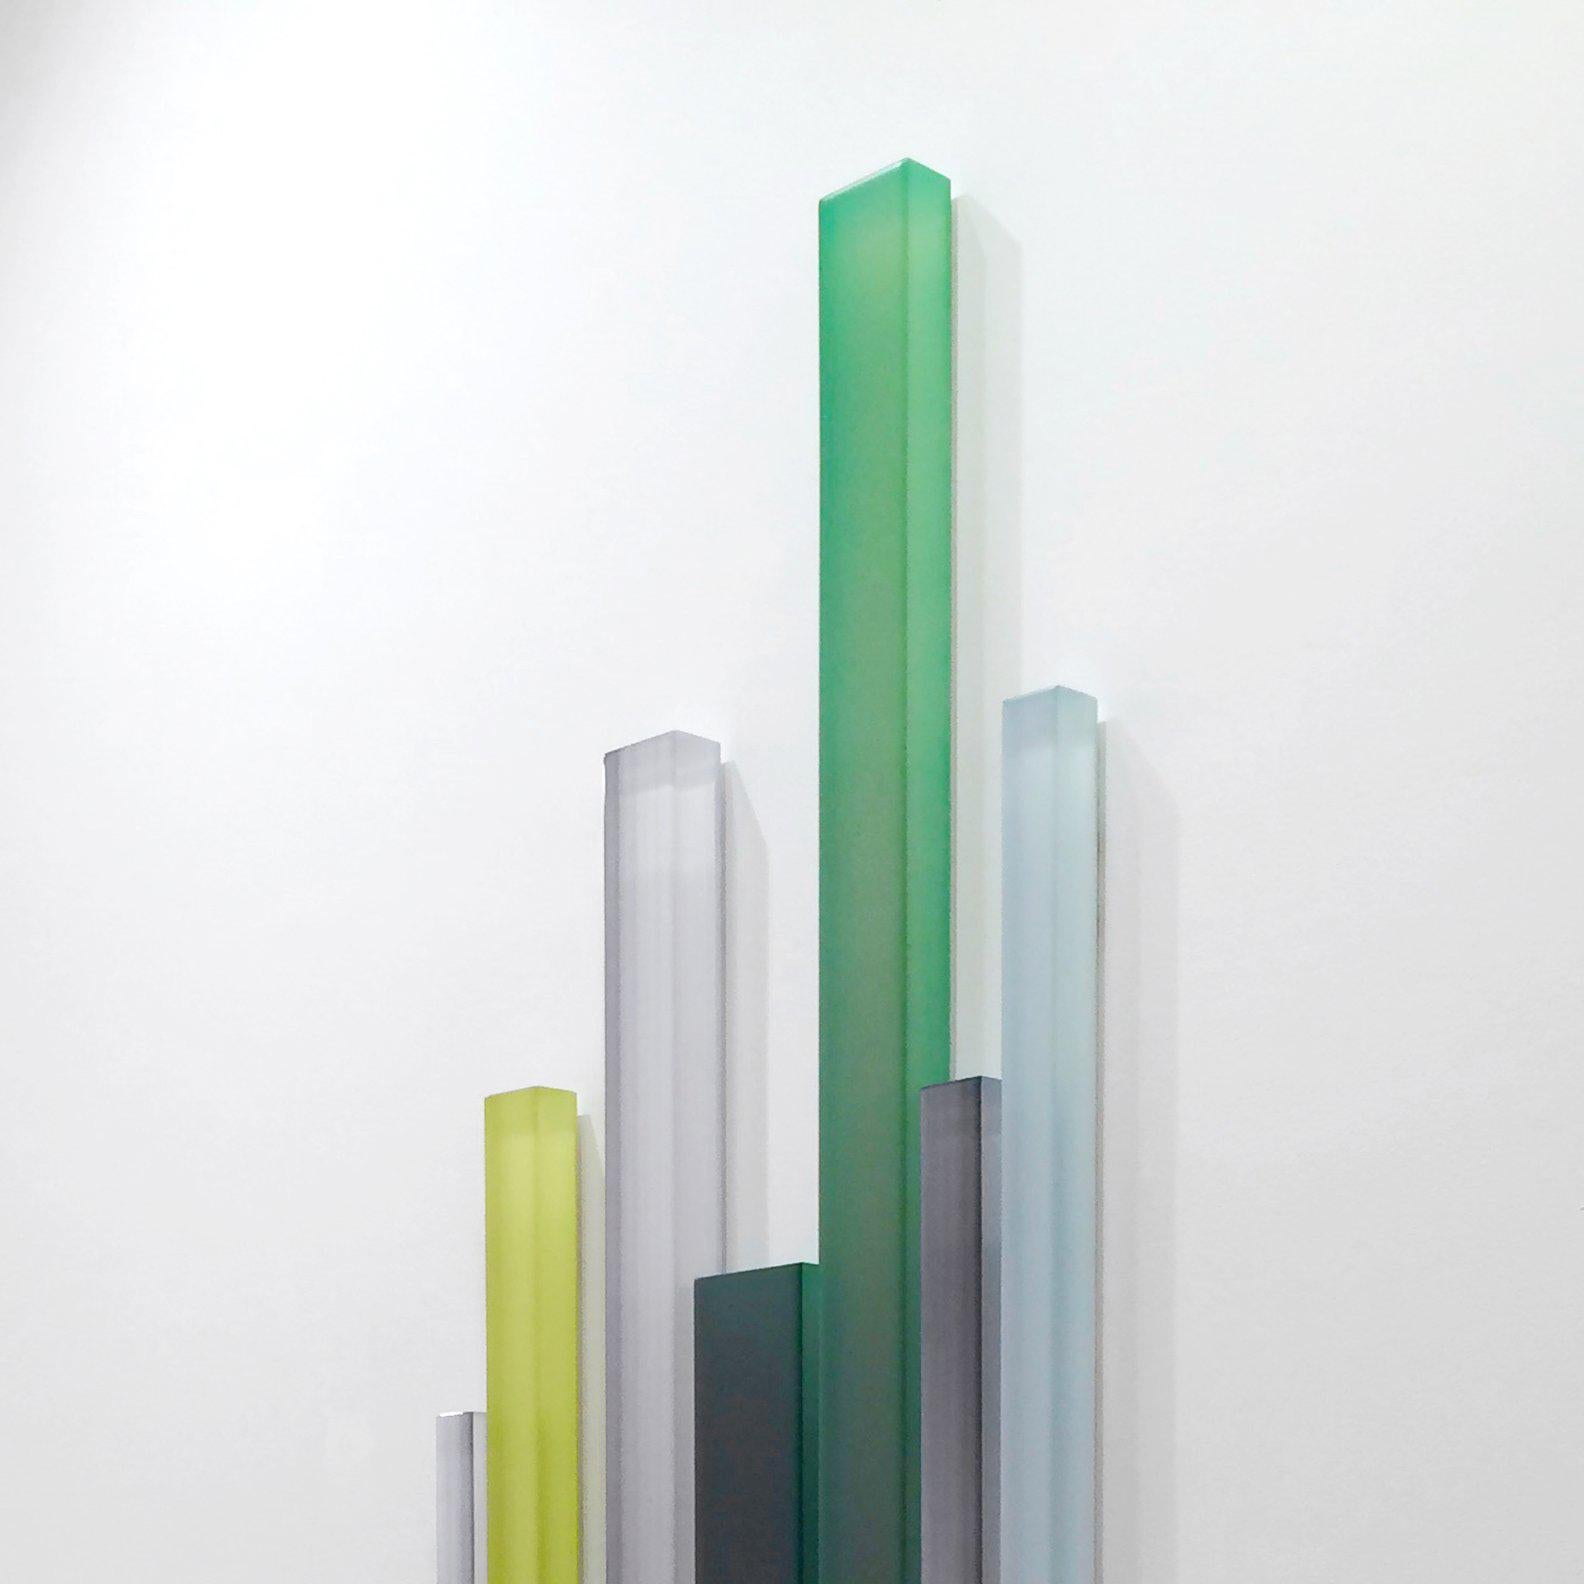 Thicket is a large-scale mixed media work constructed of luminously painted bars of cast acrylic. The white negative space on the wall allows the green, blue and gray color forms to float, and create the illusion of movement. The colors shift